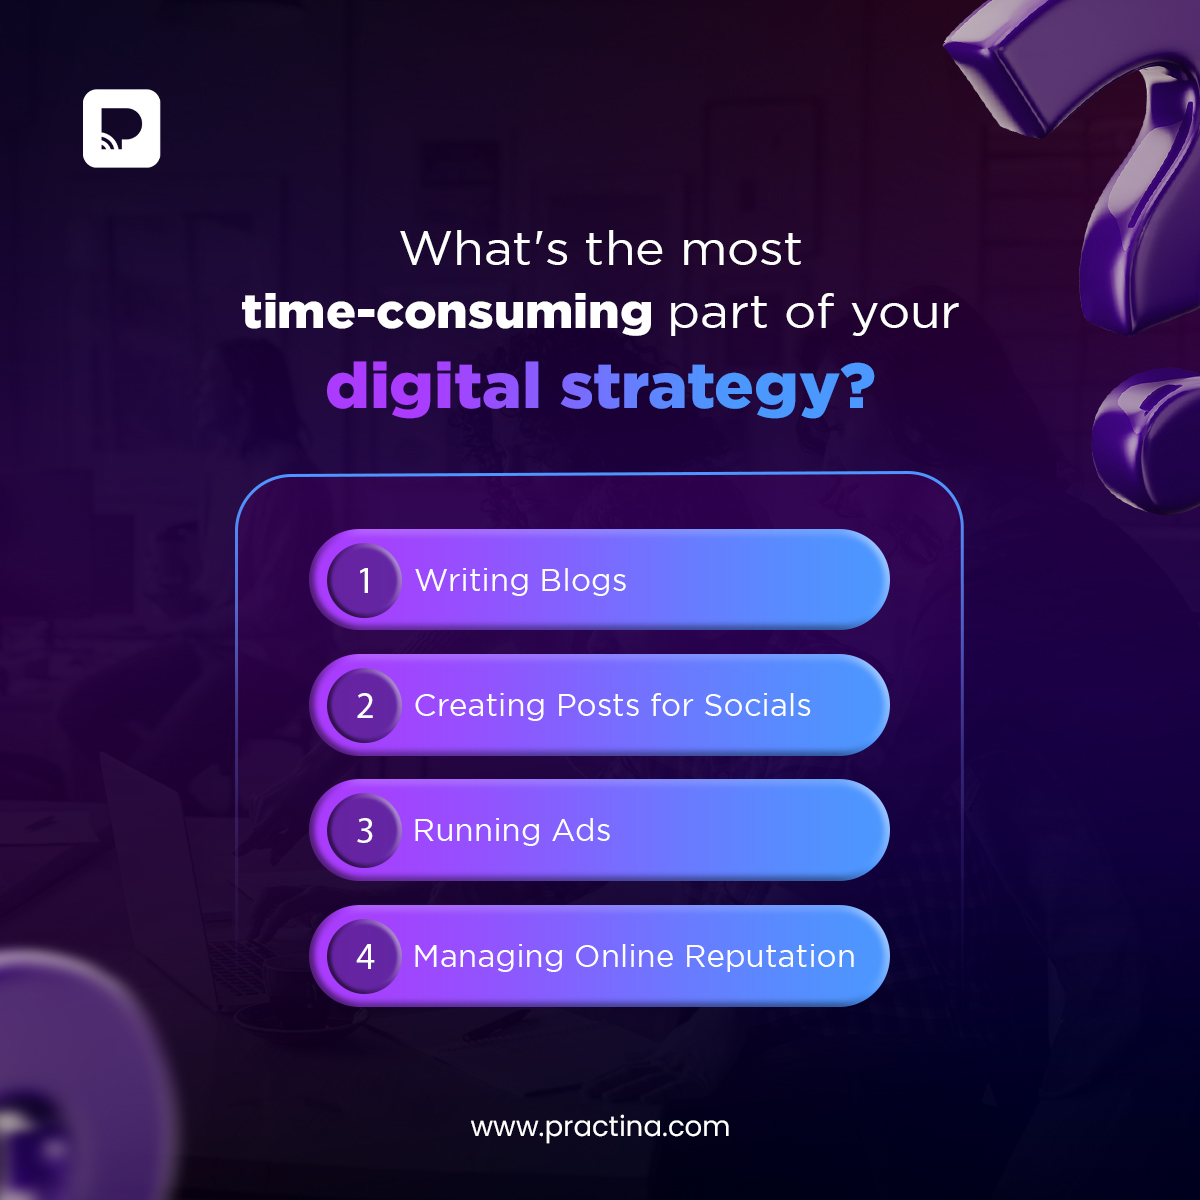 We know executing your digital strategy can be time-consuming, but which aspect eats up most of your valuable time? Let us know by casting your vote! 

Also, you should know that Practina can tackle them all efficiently, saving you precious hours - Get a free trial today!